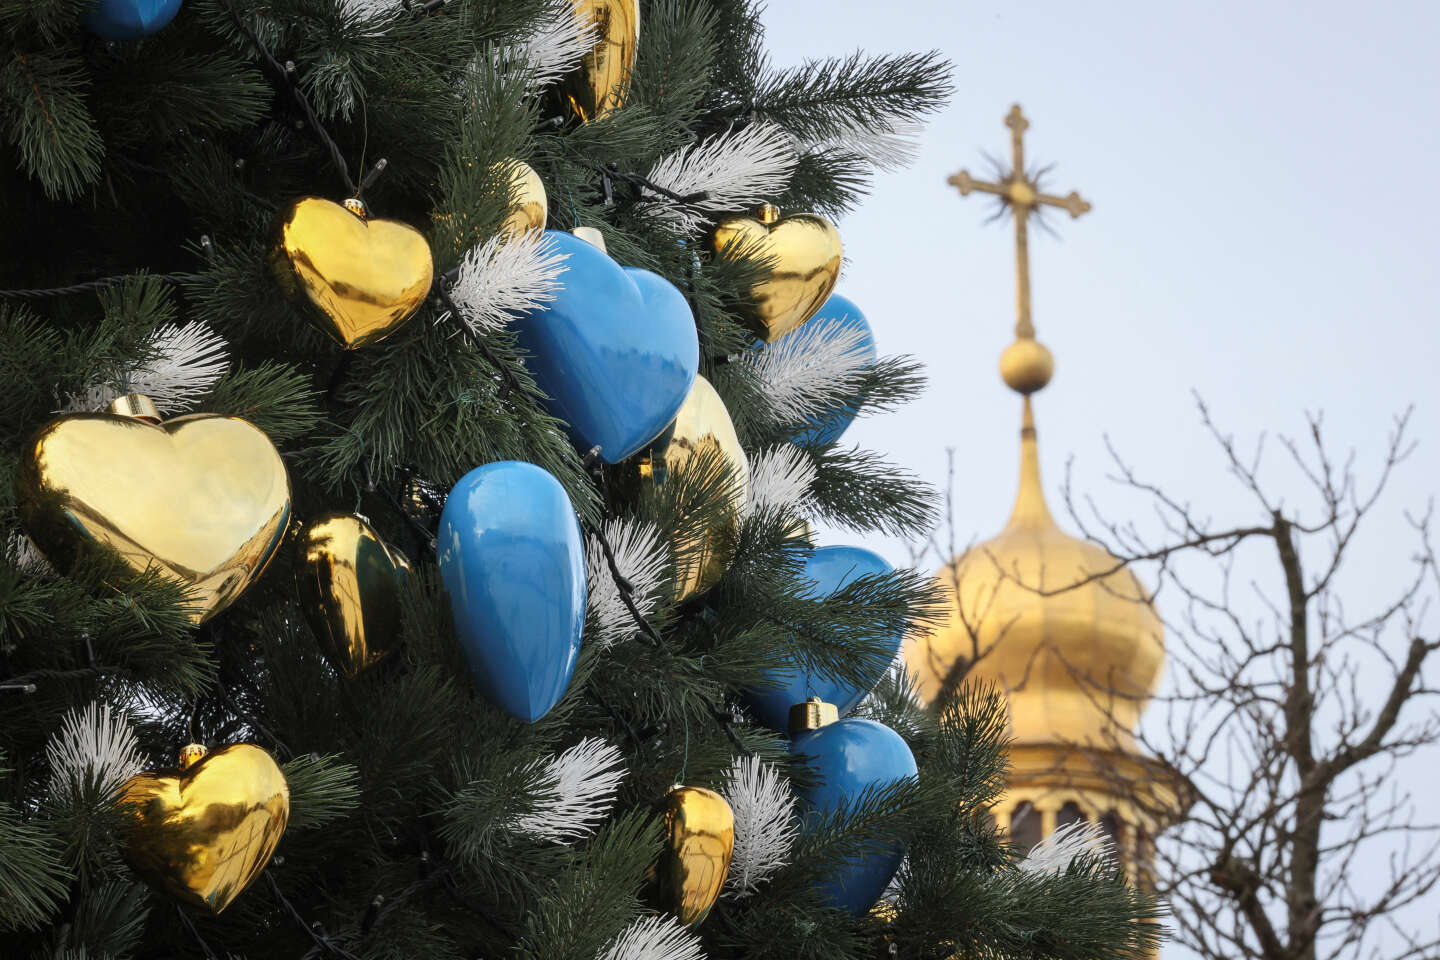 for the first time, Christmas is celebrated on December 25